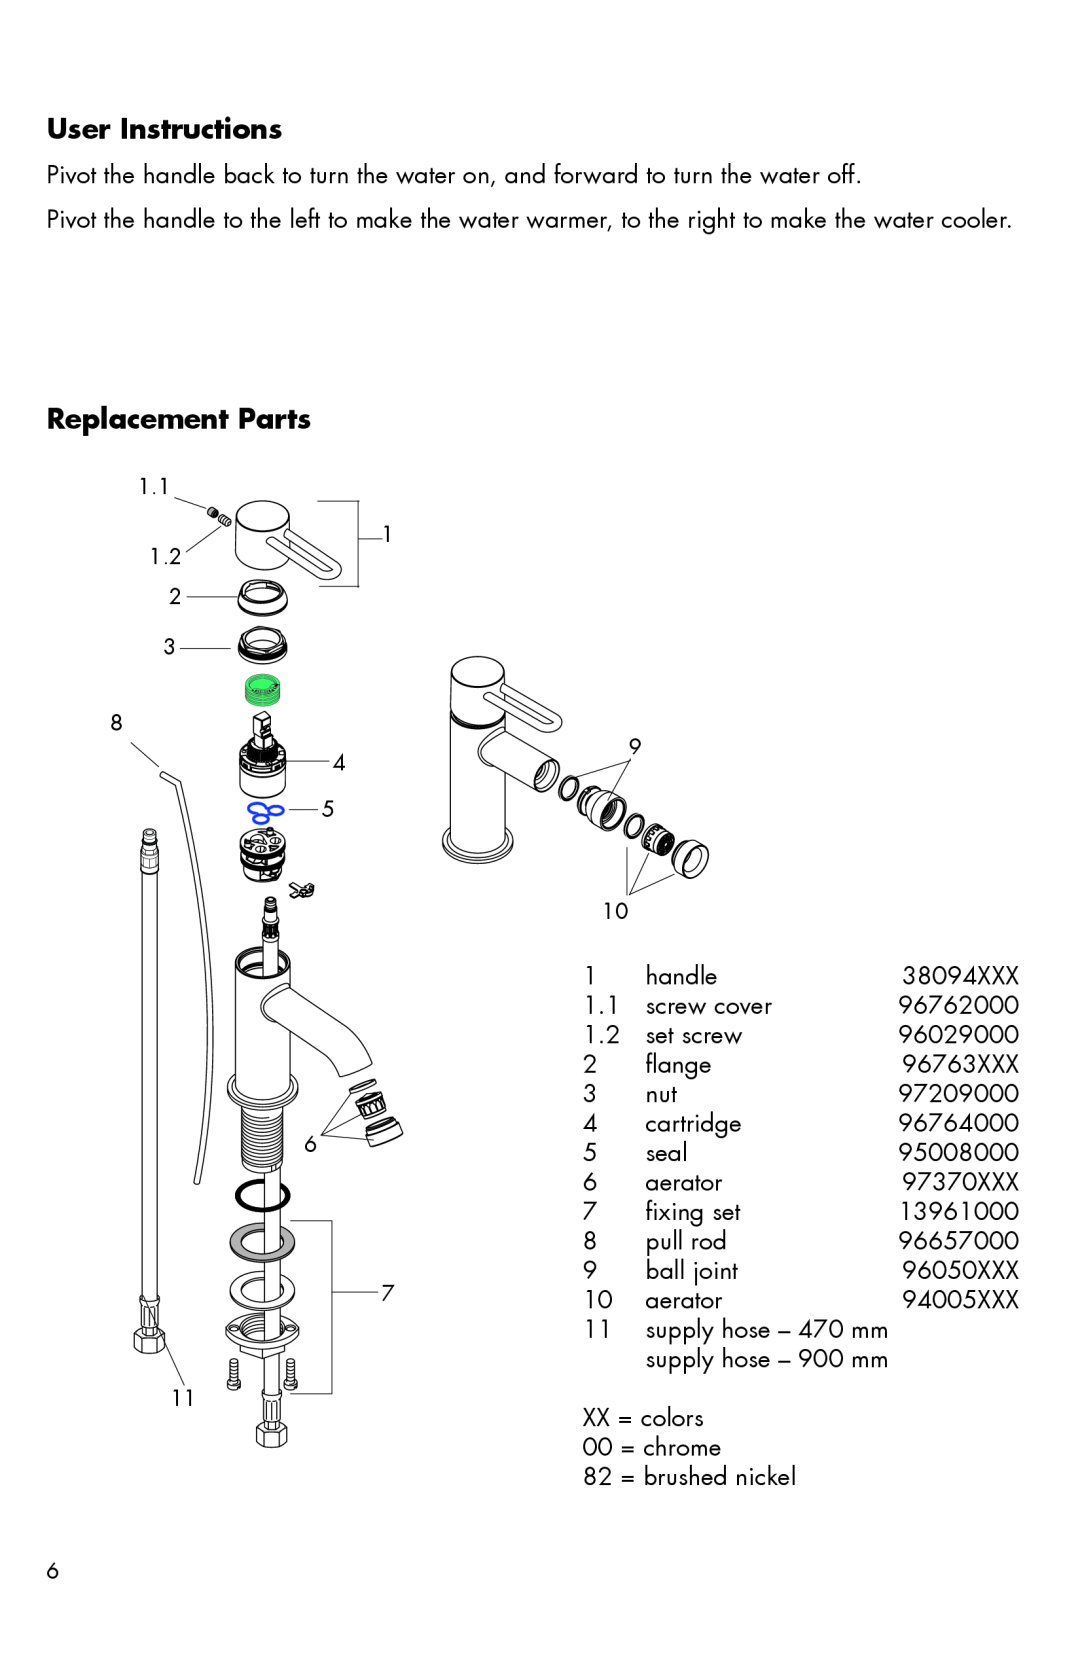 Axor 3802XX1, 38210XX1, 38025XX1 User Instructions, Replacement Parts, 1.1, supply hose - 470 mm supply hose - 900 mm 